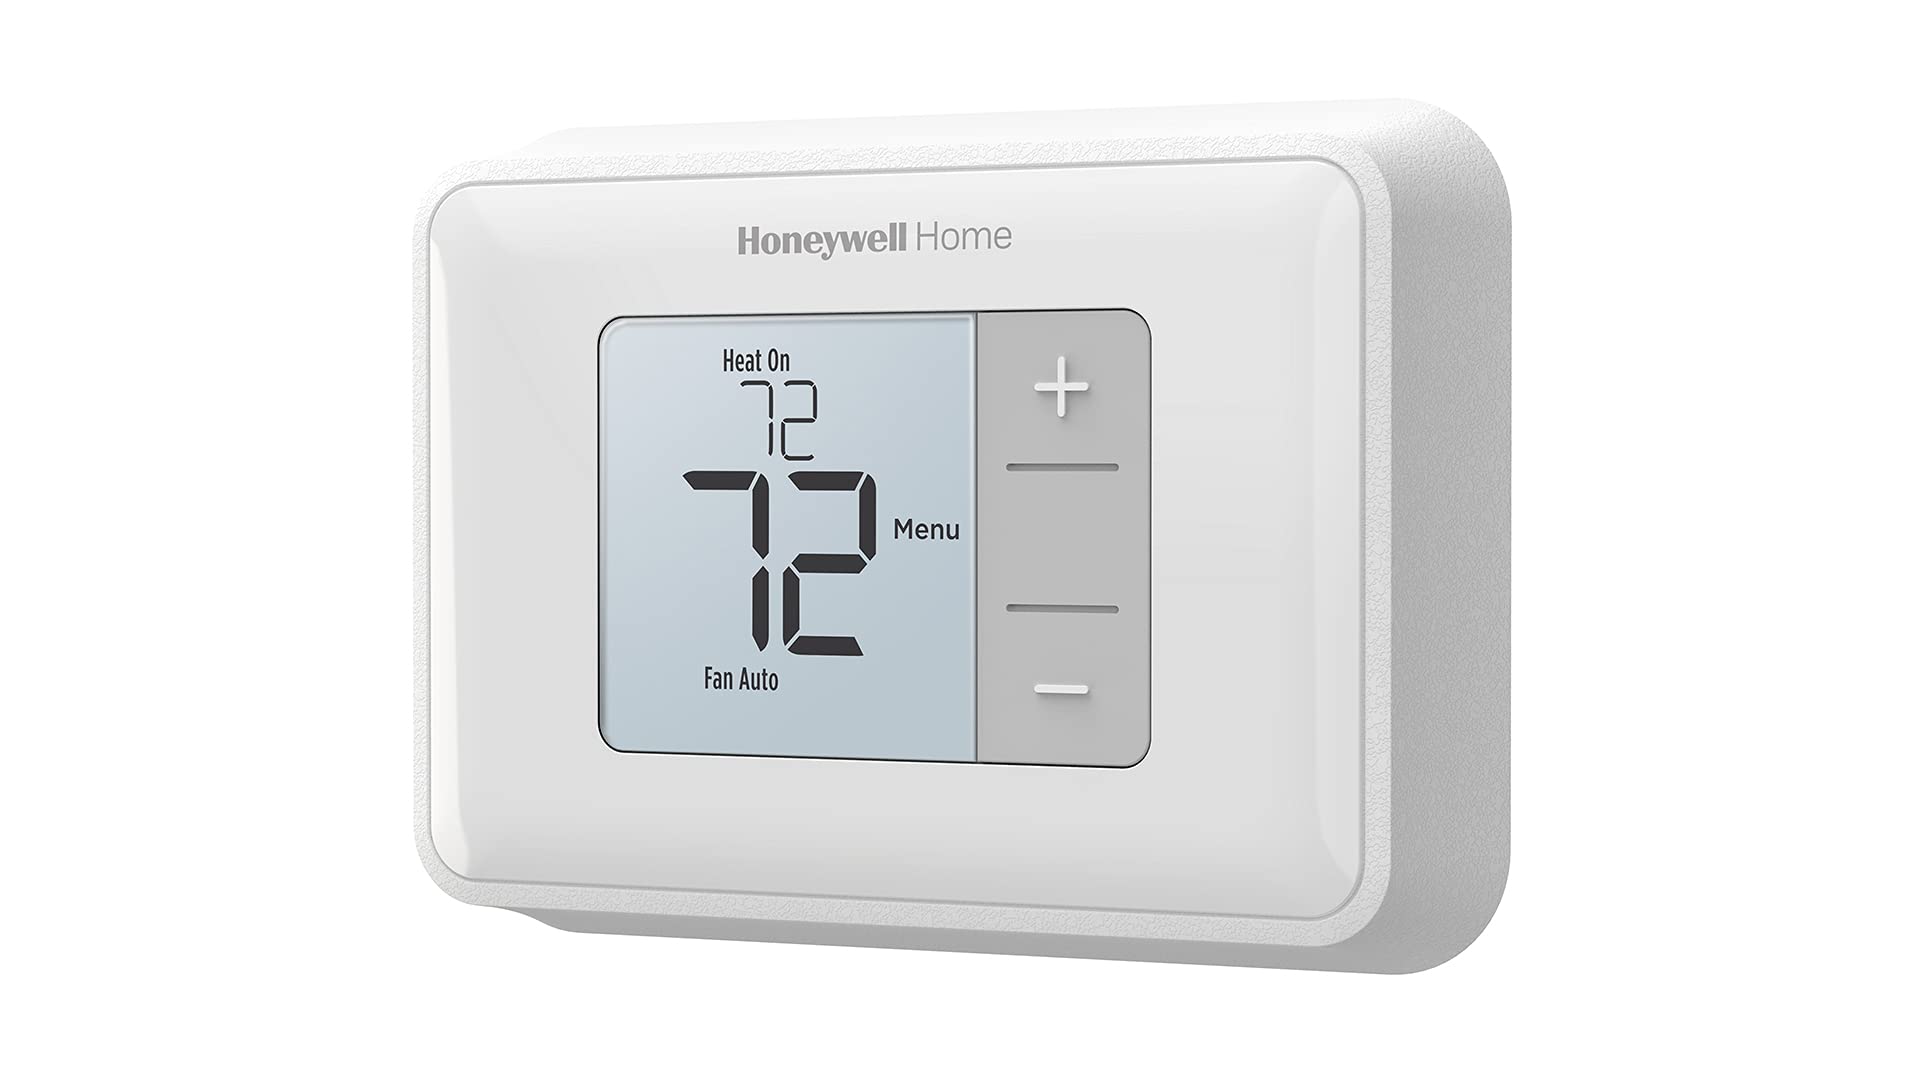 Honeywell Home RTH5160D1003 Non-programmable Thermostat, White